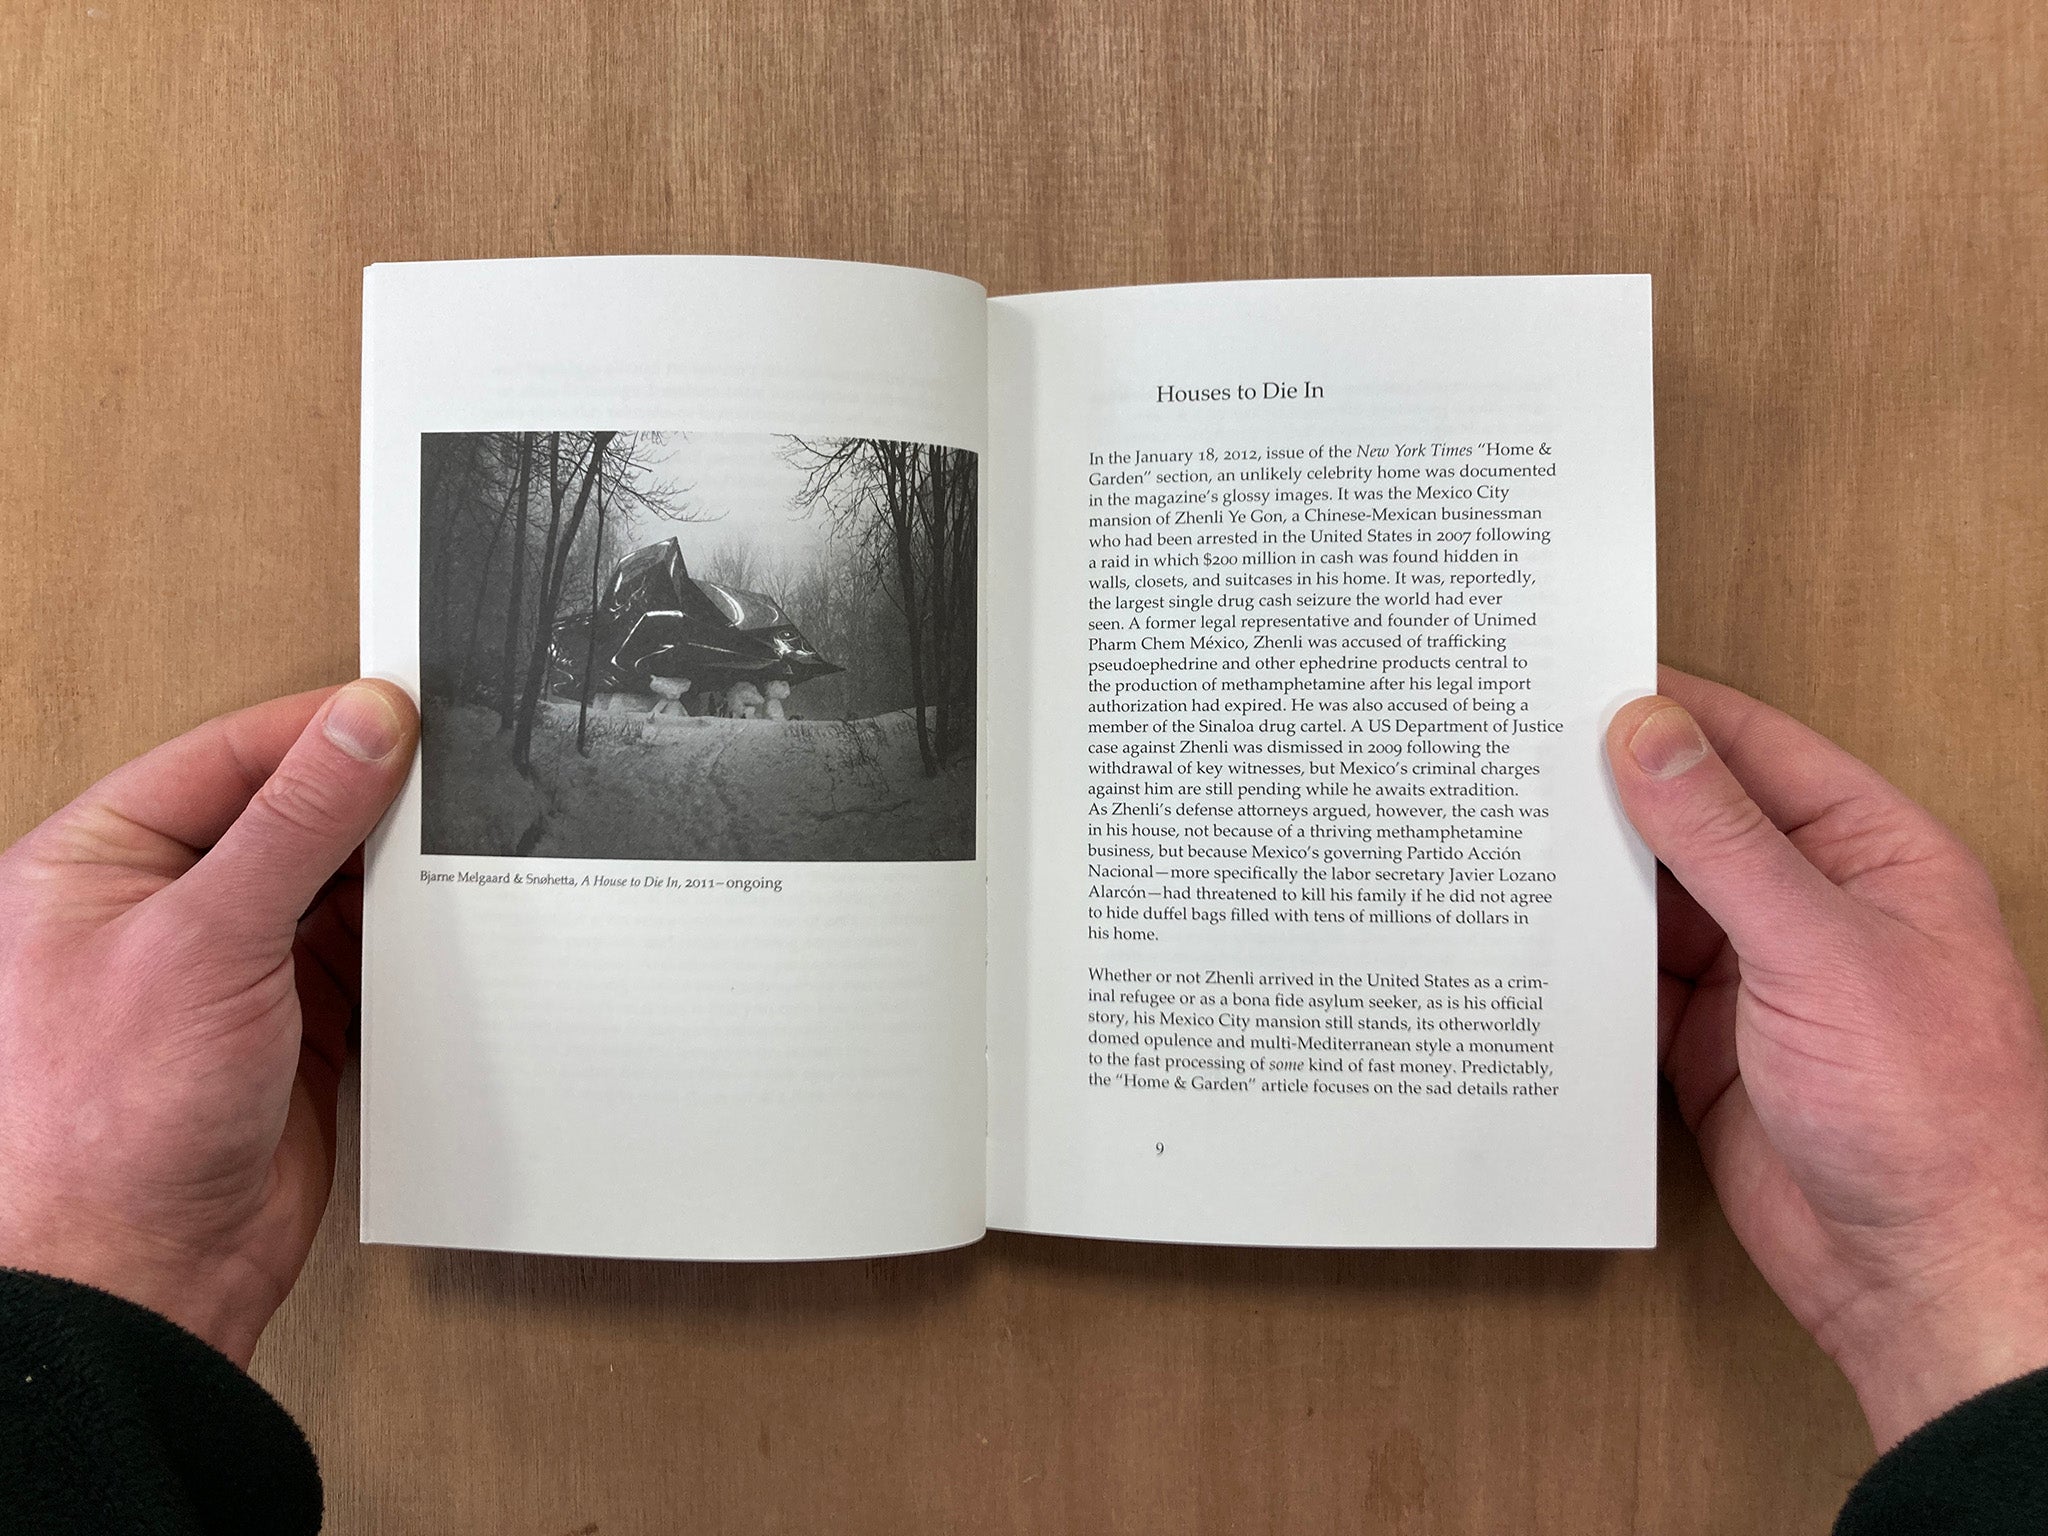 HOUSES TO DIE IN / AND OTHER ESSAYS ON ART by Ina Blom